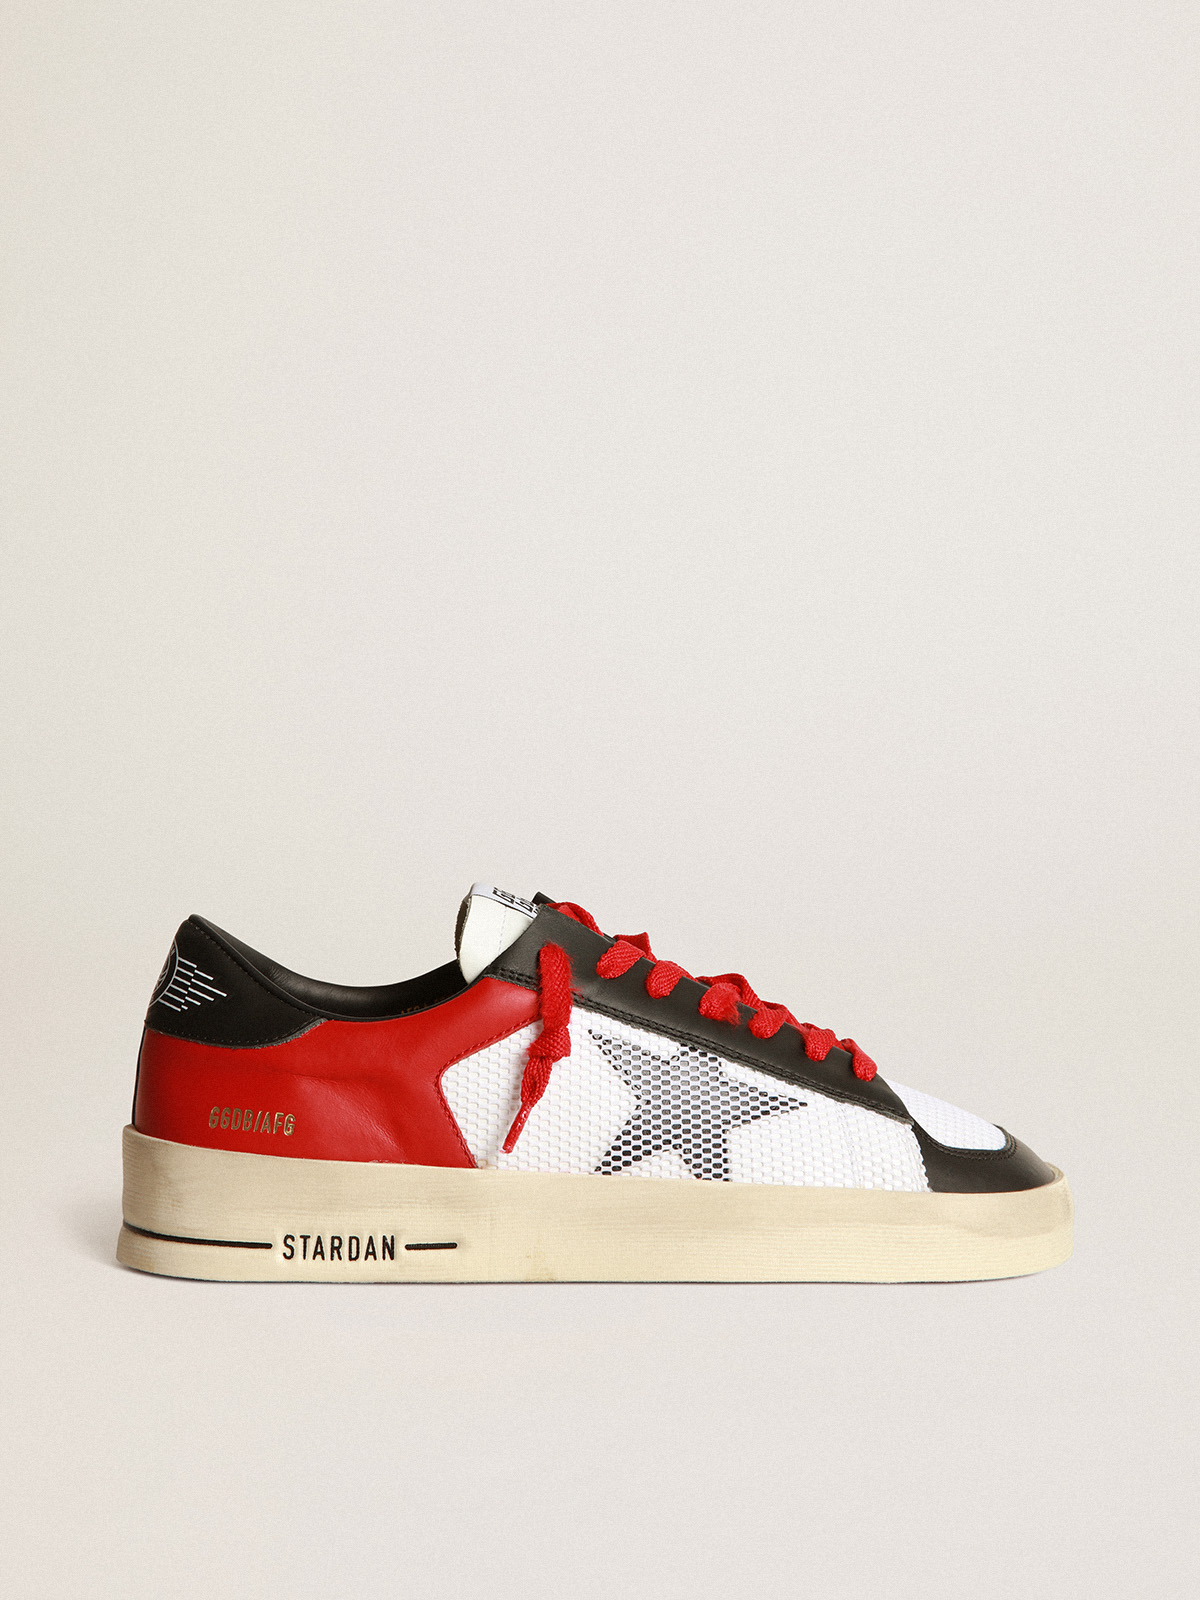 Stardan sneakers in red and white leather with mesh inserts | Golden Goose